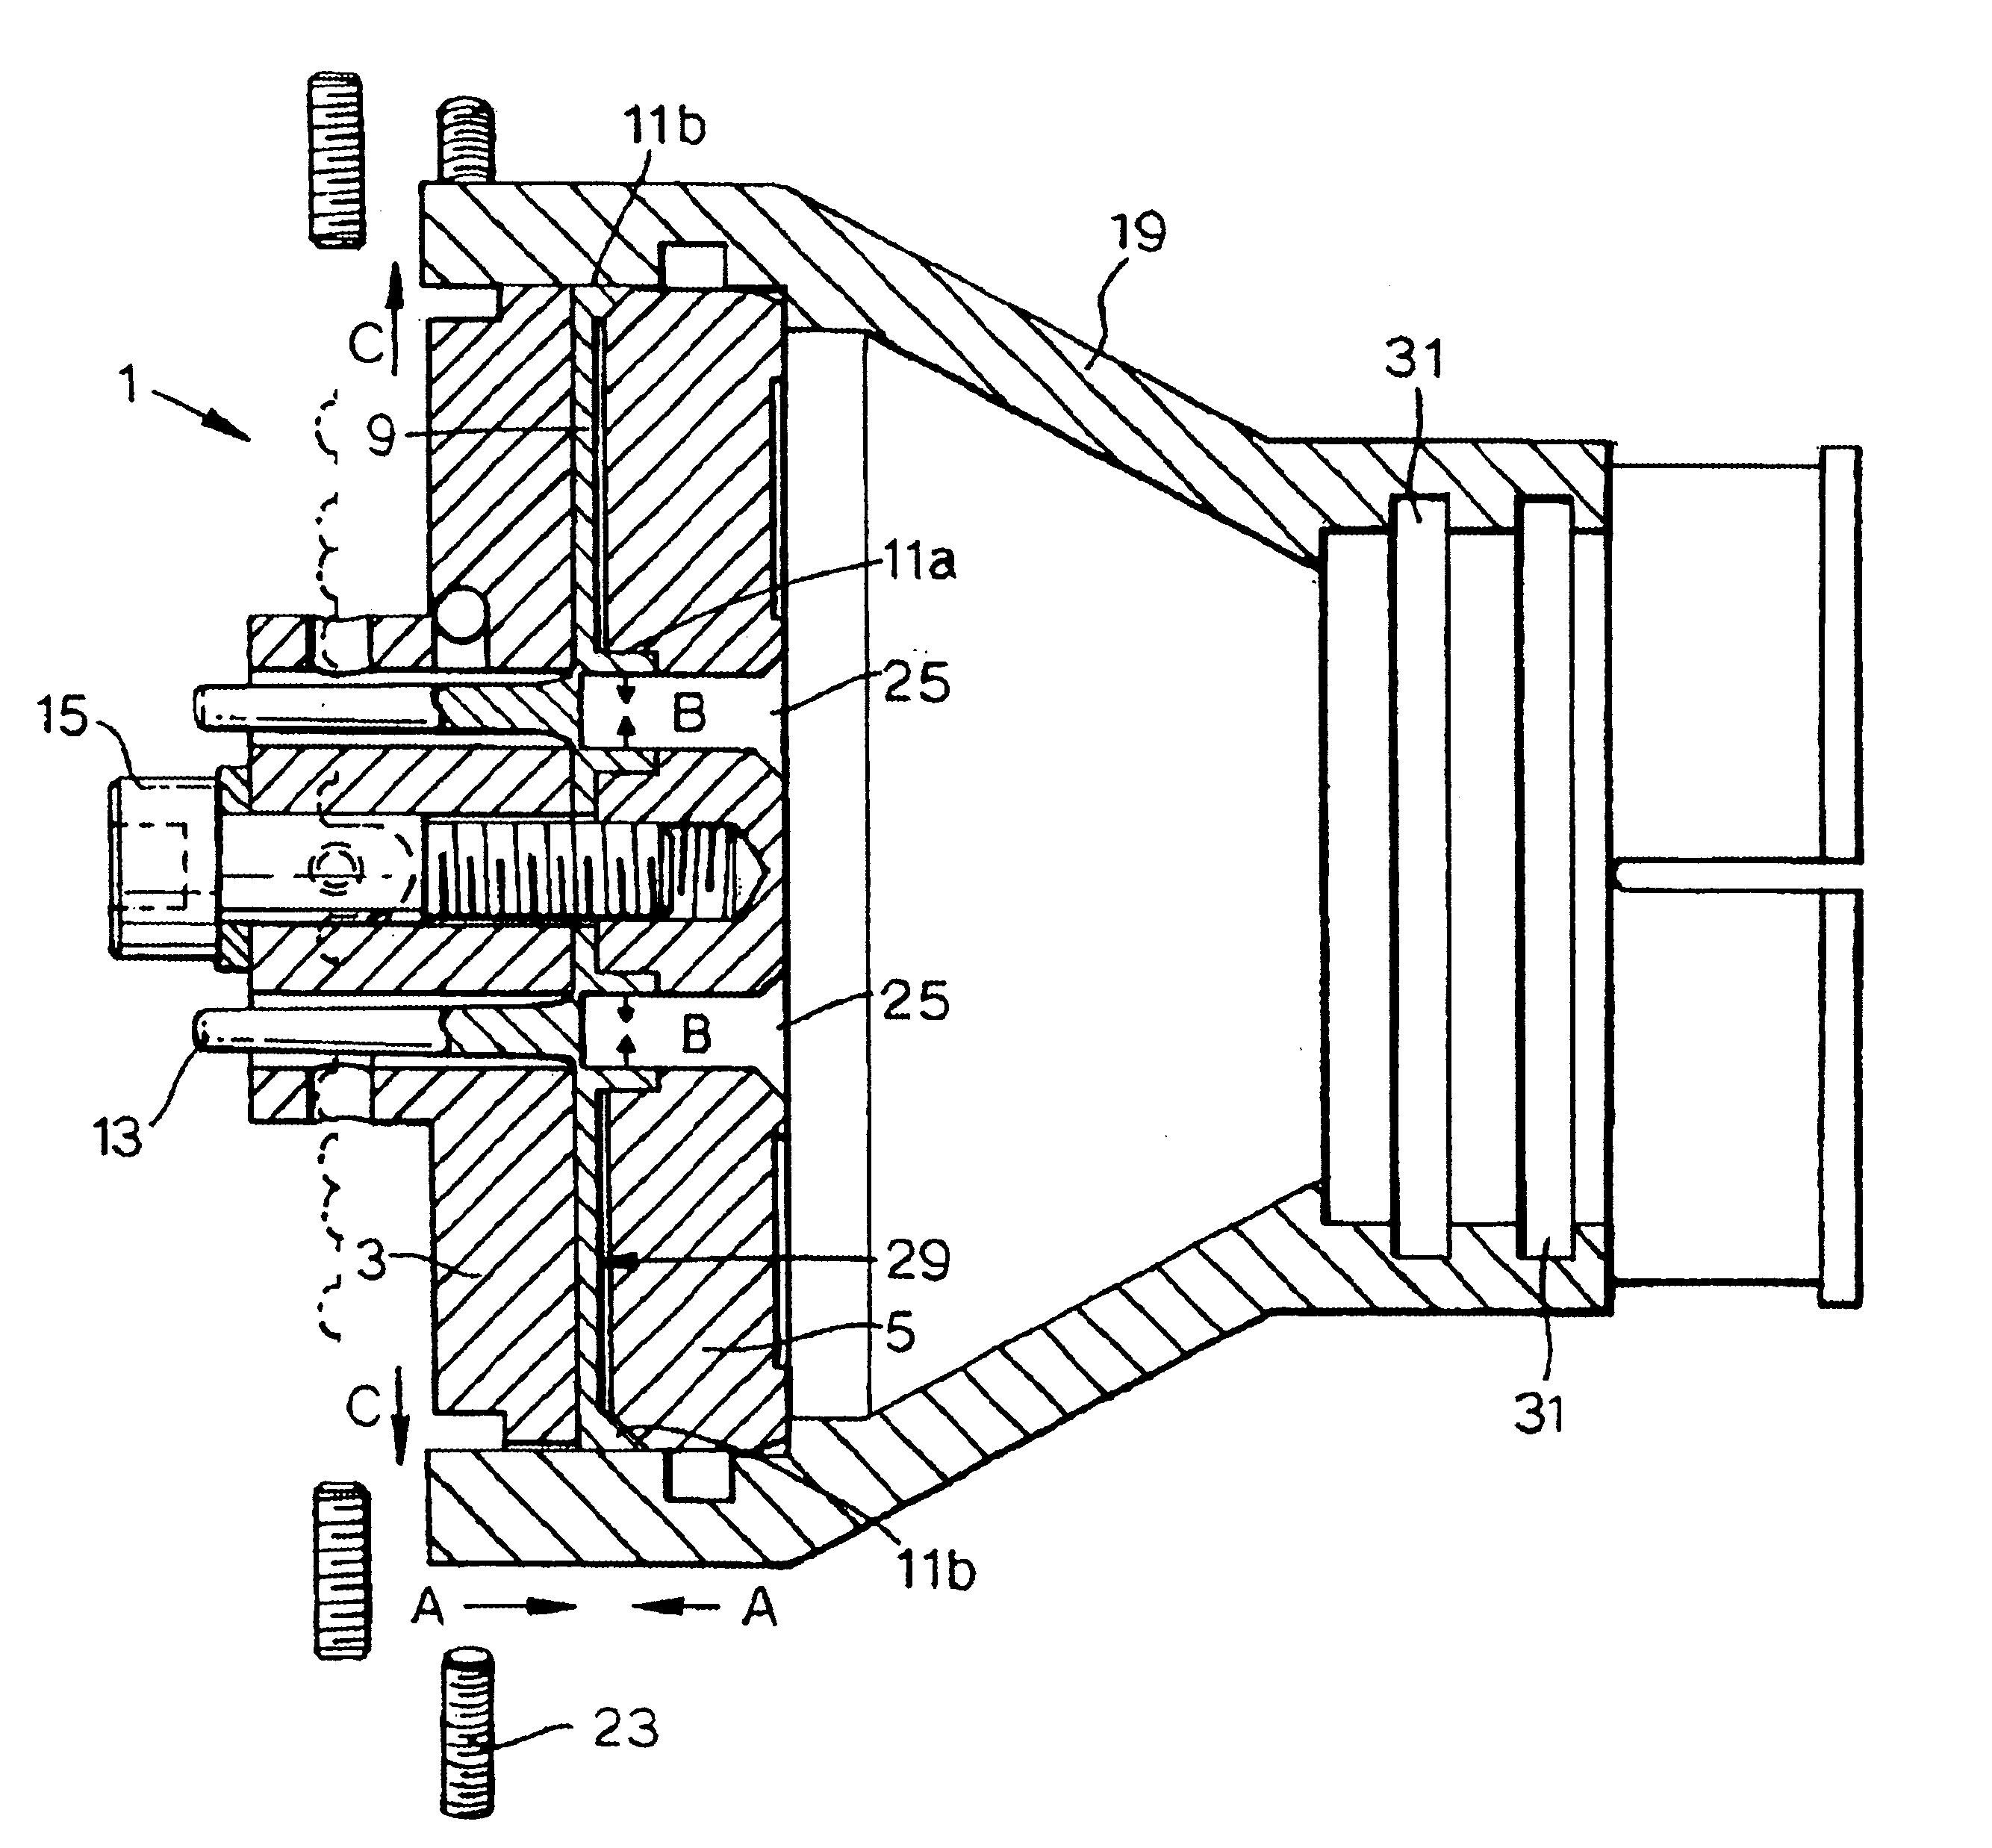 Longitudinally activated compression sealing device for elongate members and methods for using the same